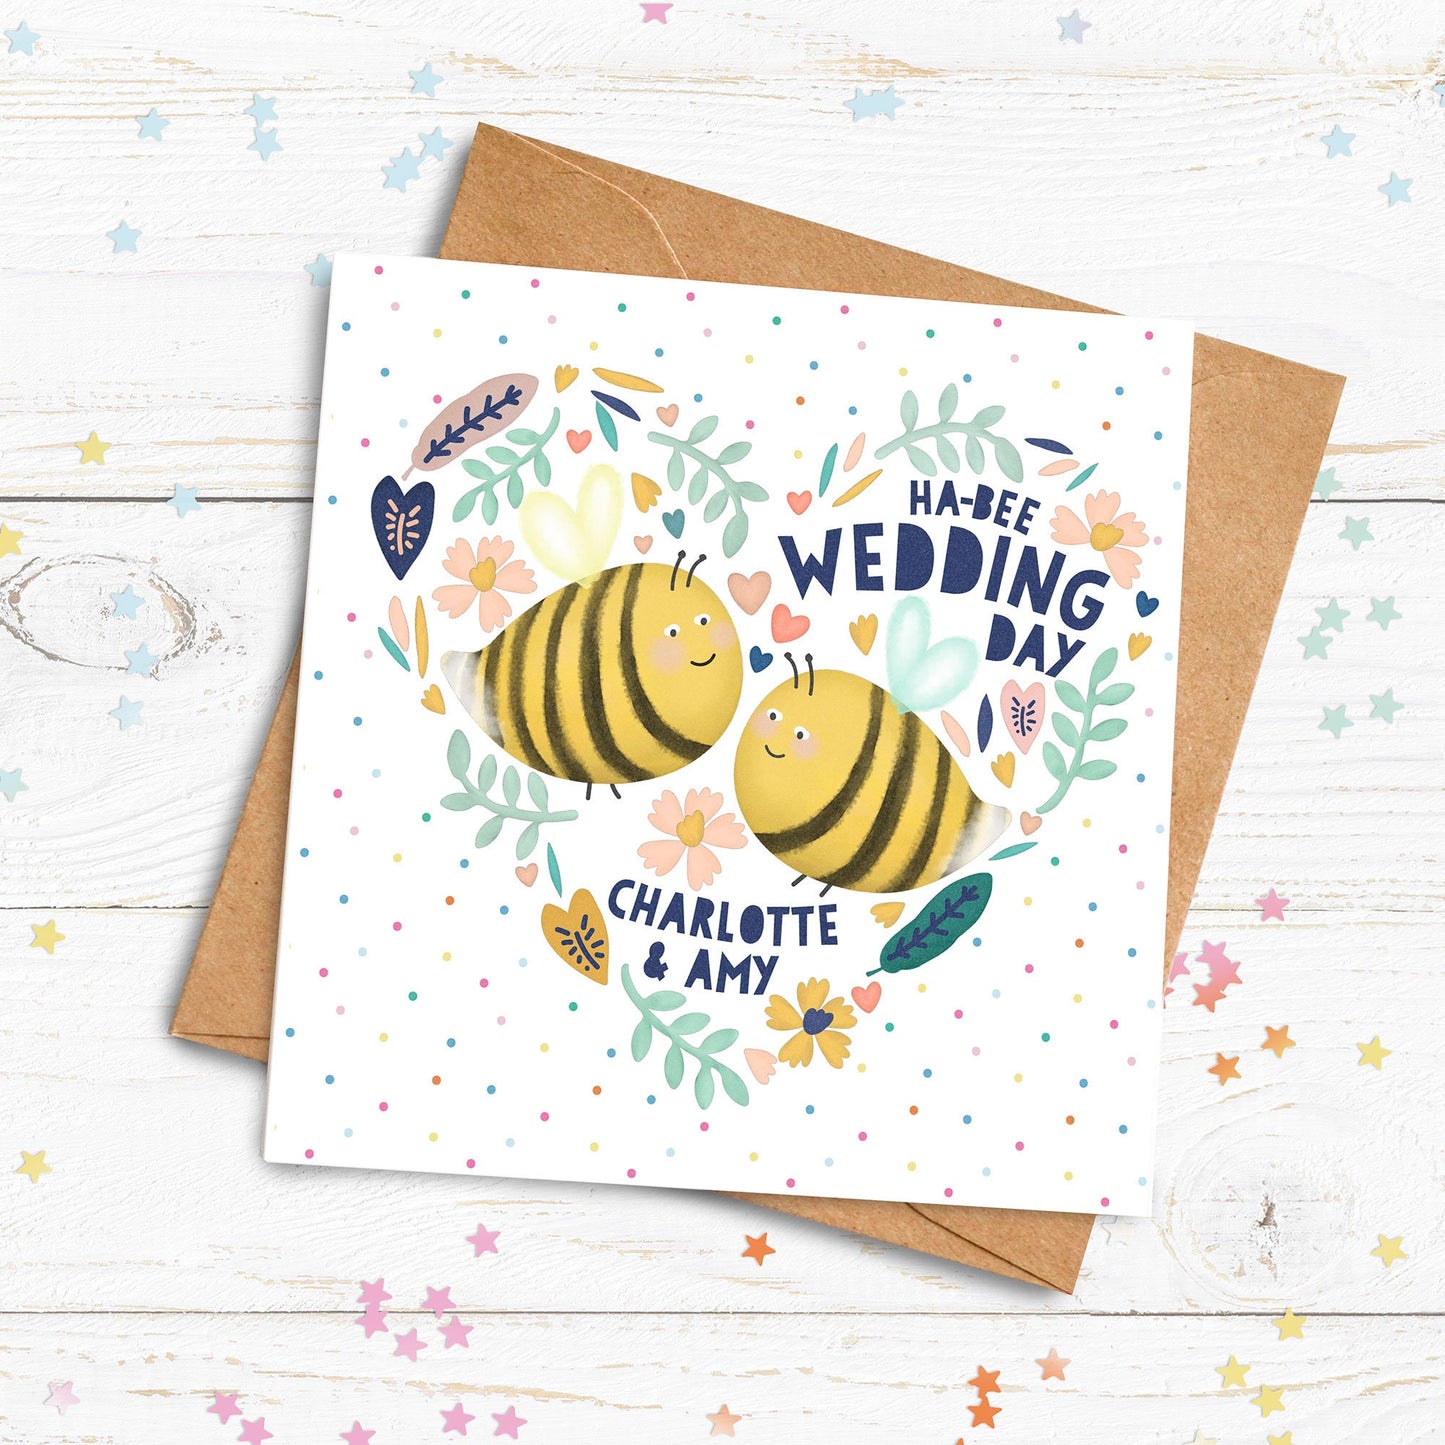 Ha-Bee Wedding Day Personalised Card. Wedding Bee Card. Congratulations on your wedding personalised card. Send Direct Option.